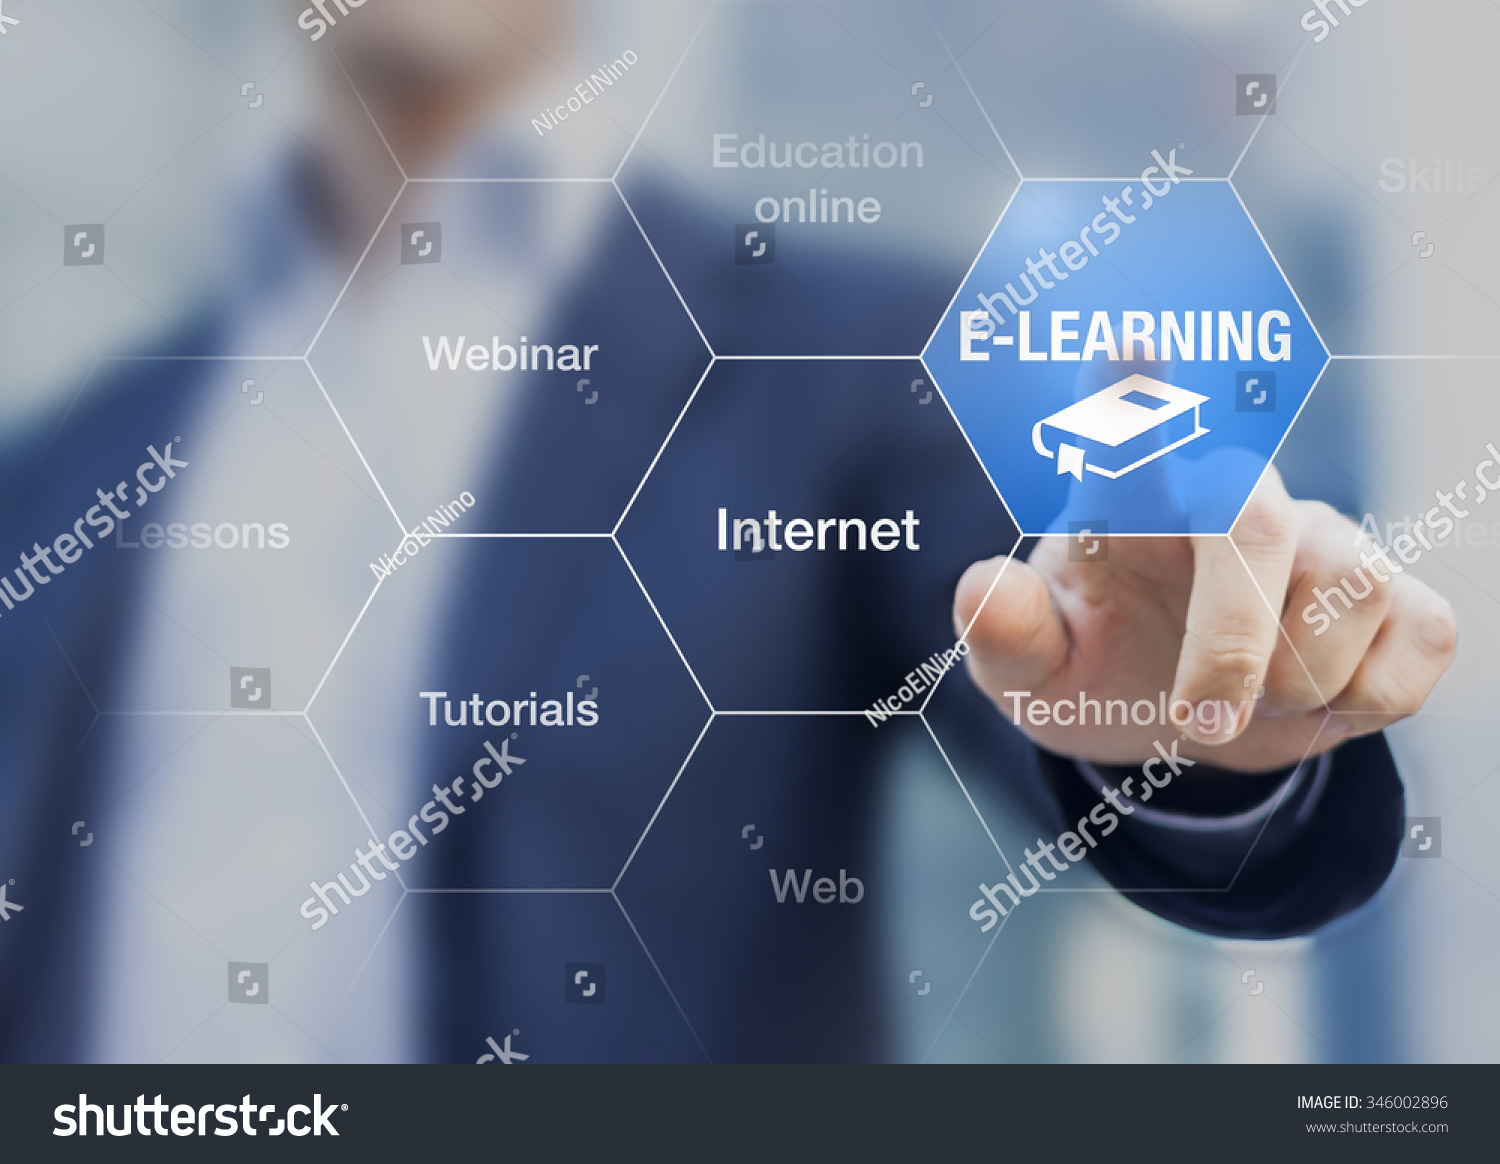 E-learning concept with a teacher presenting online education program #346002896